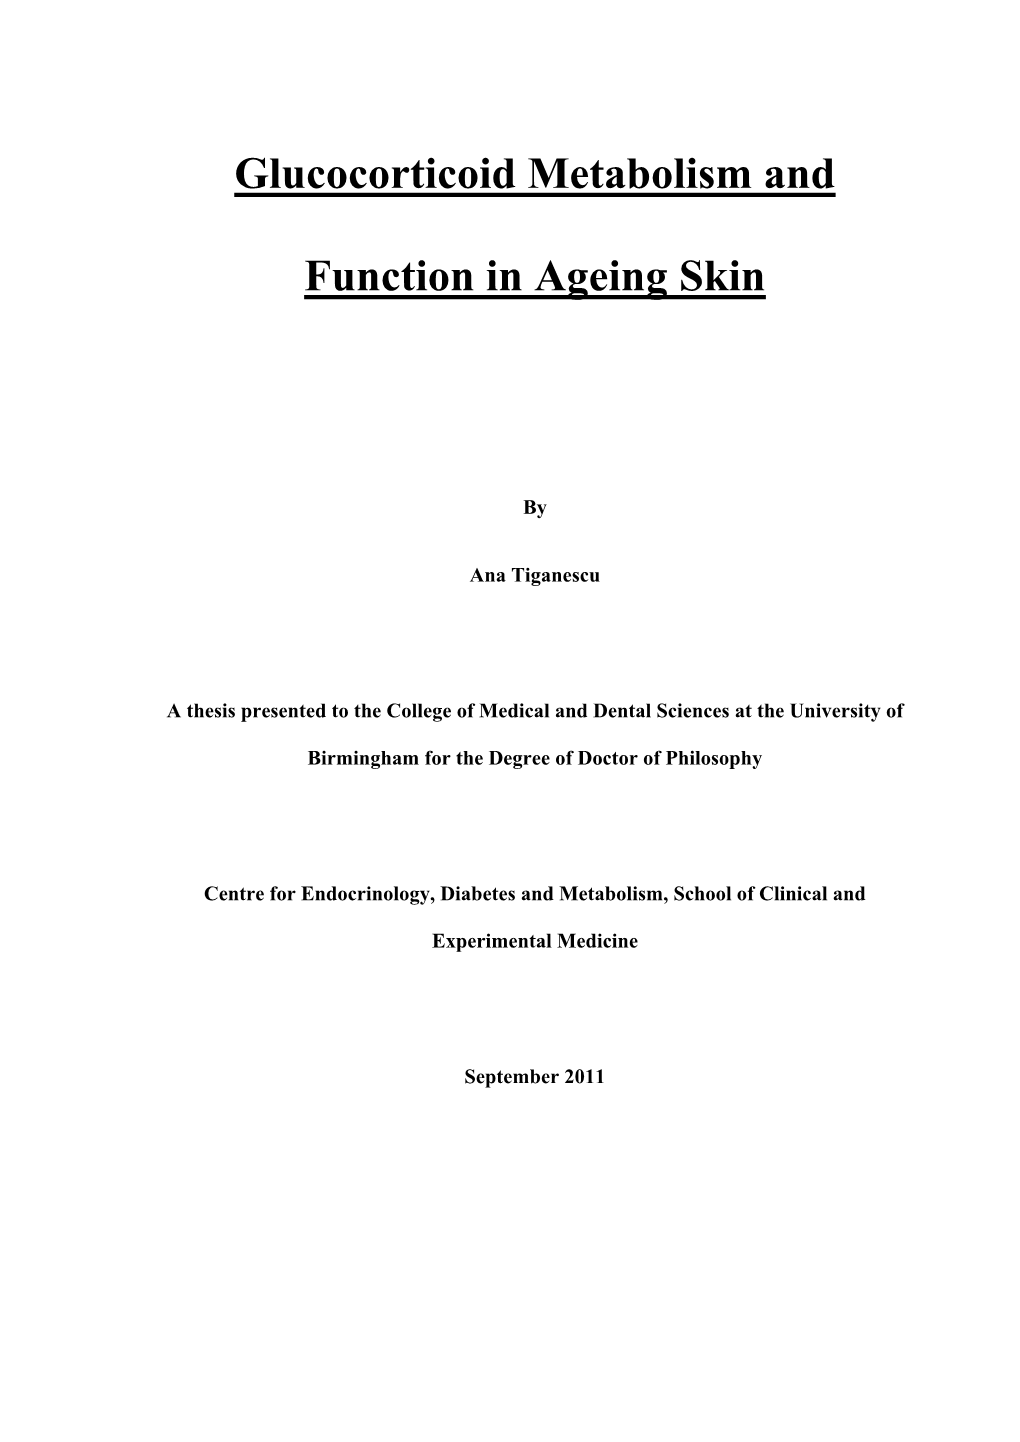 Glucocorticoid Metabolism and Function in Ageing Skin